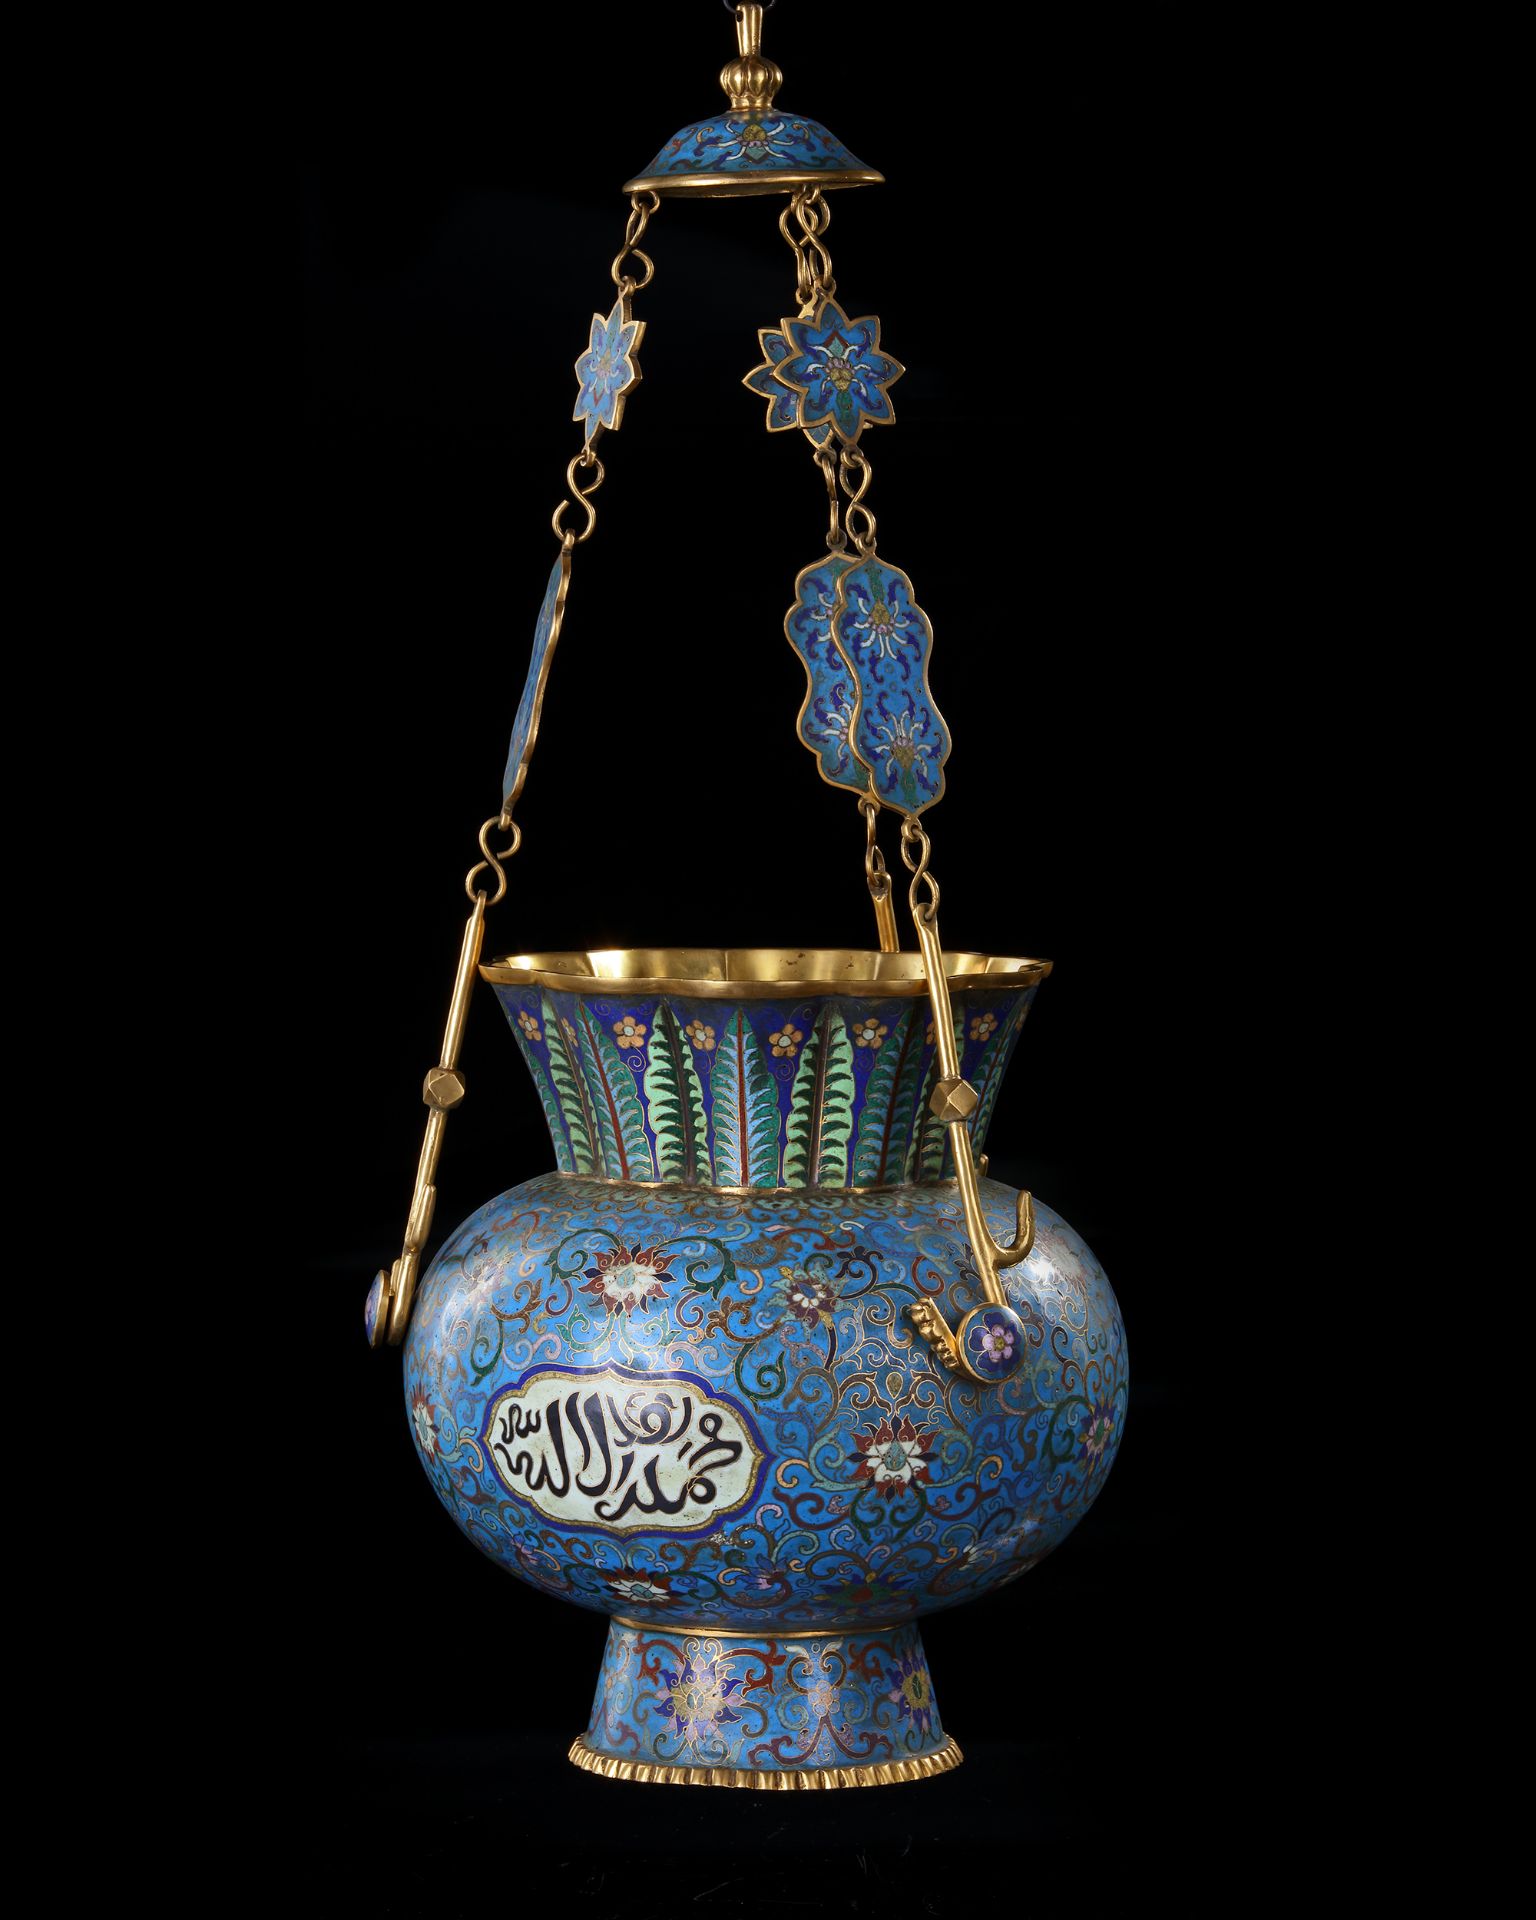 A CHINESE CLOISONNÉ MOSQUE LAMP FOR THE ISLAMIC MARKET, LATE 19TH CENTURY